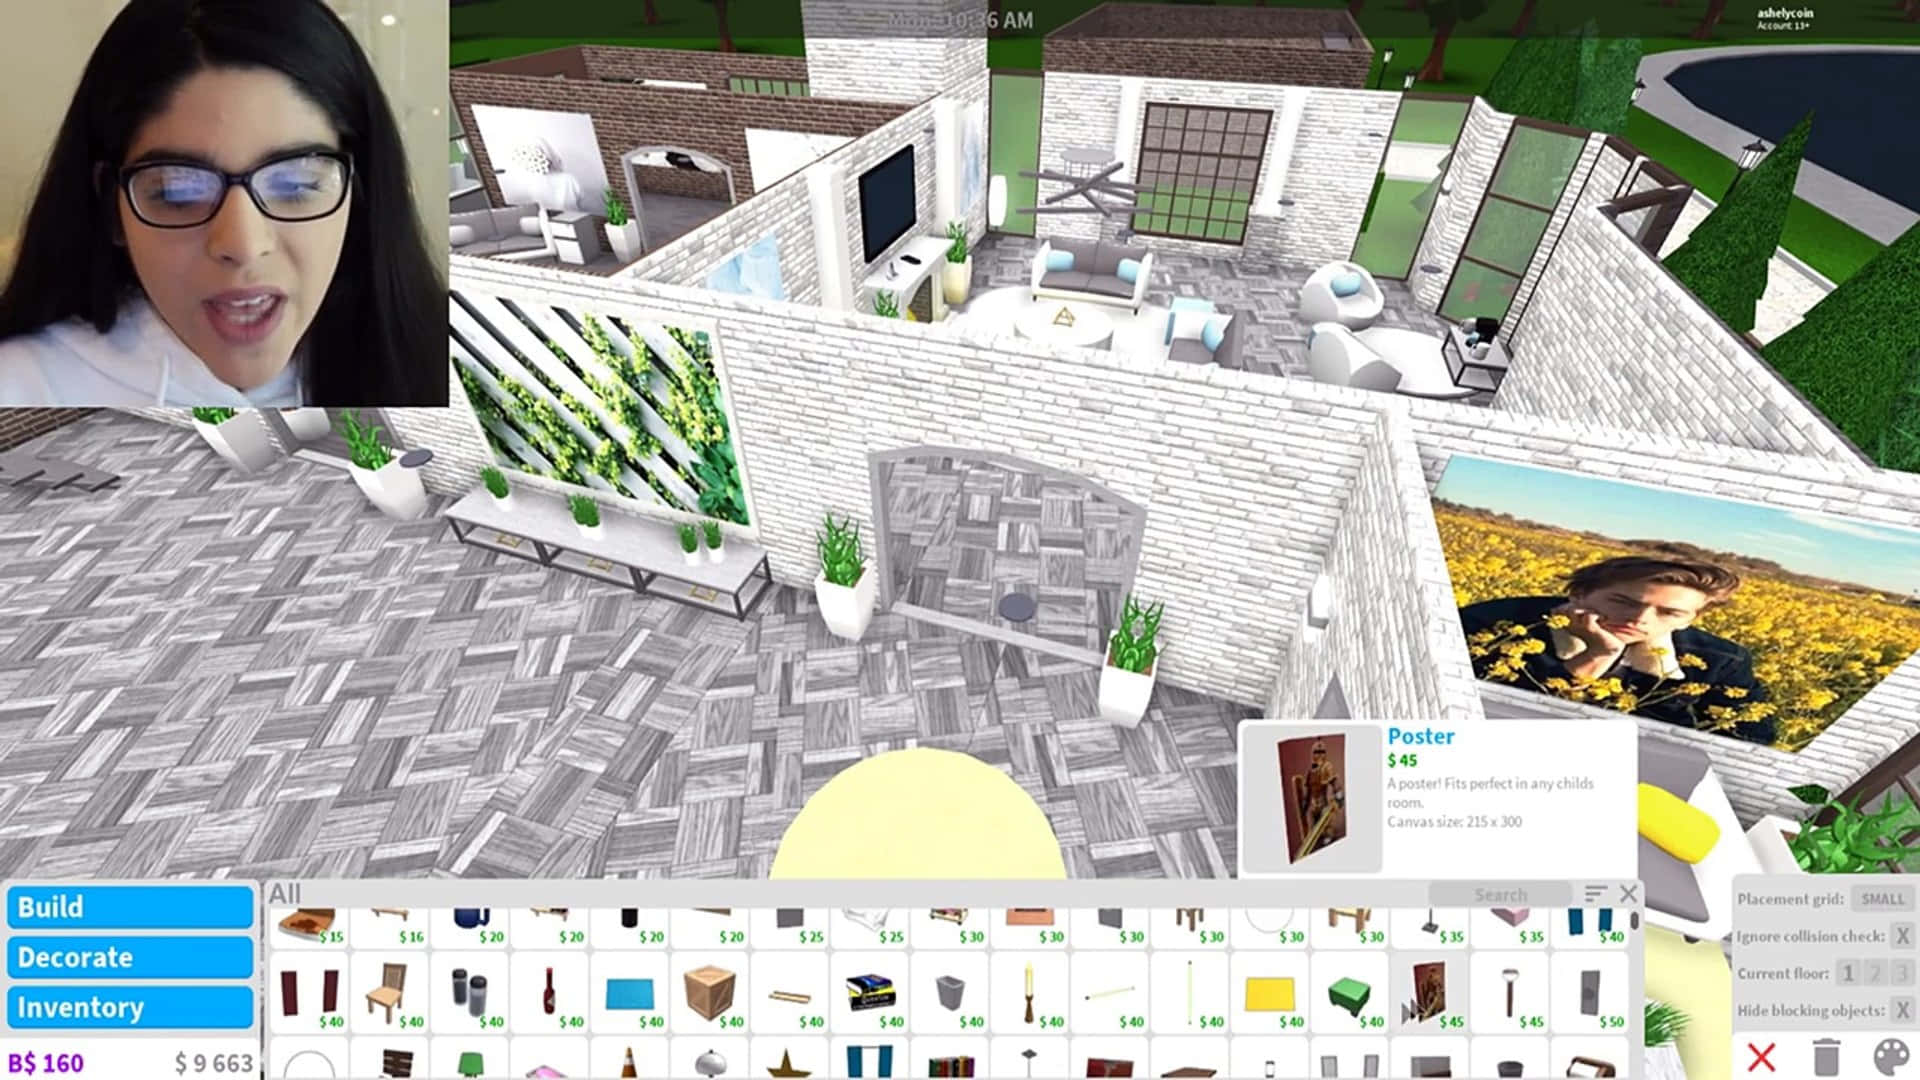 Hang out, have fun and build your dream world in Roblox Bloxburg. Wallpaper